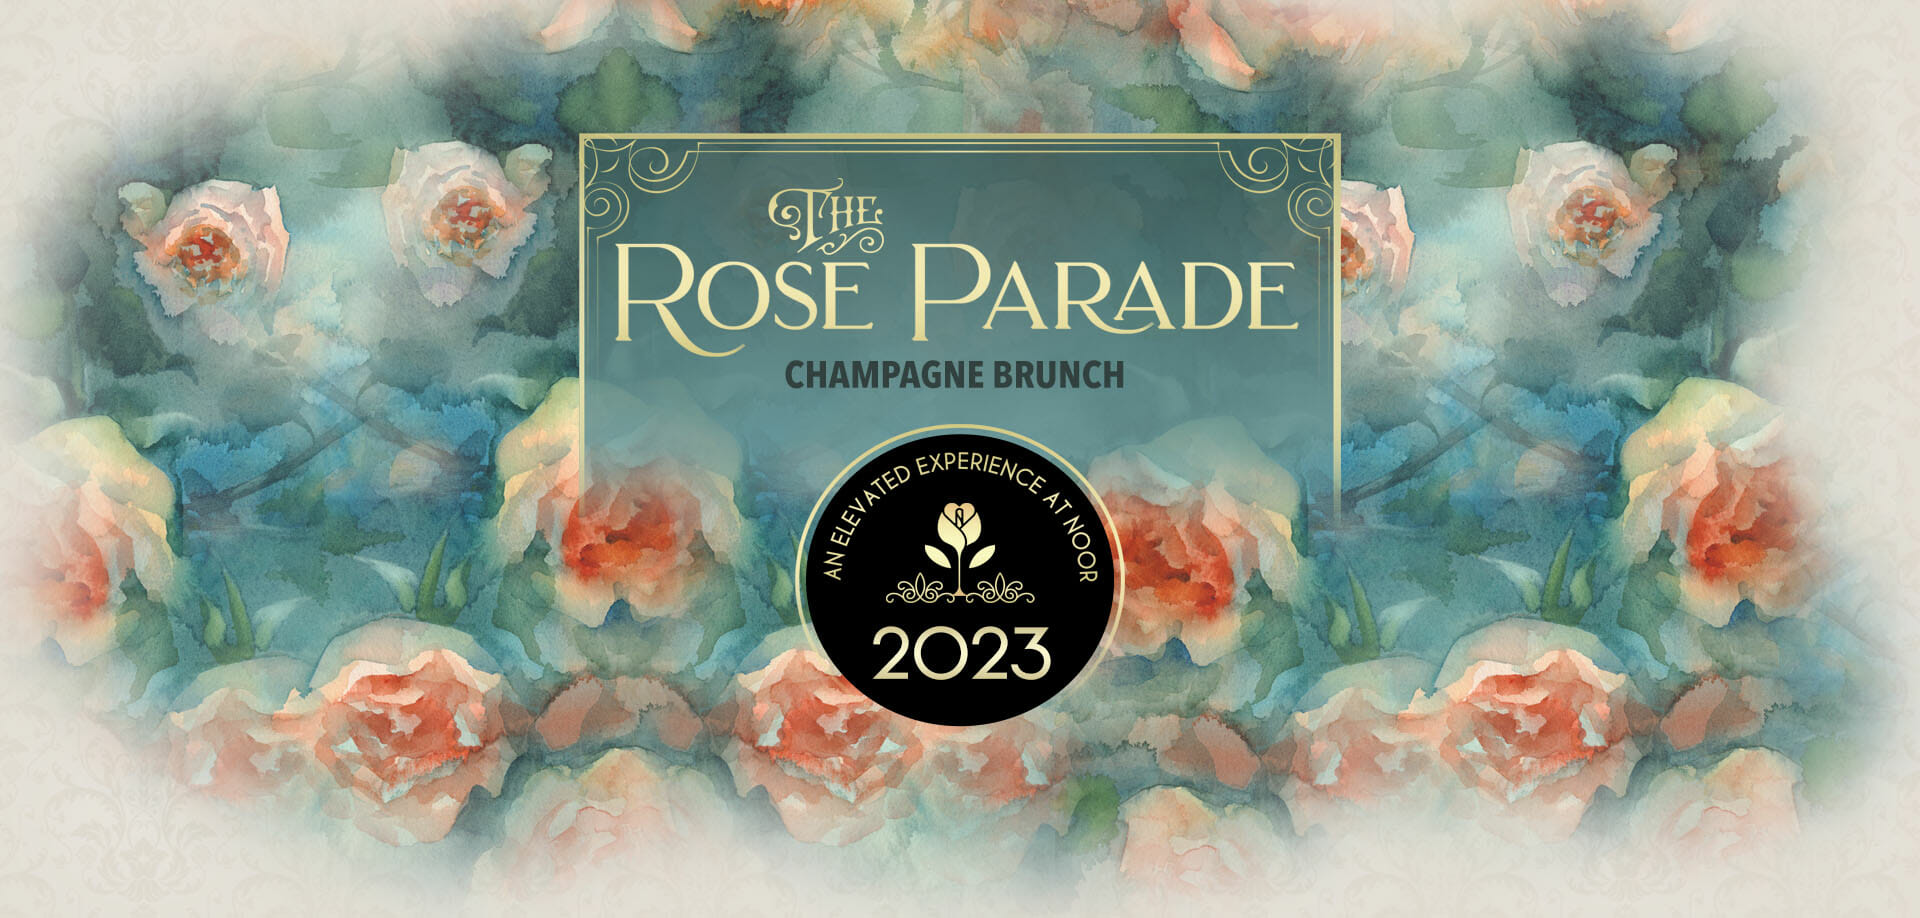 rose parade champagne brunch 2021 banner with red and gold roses